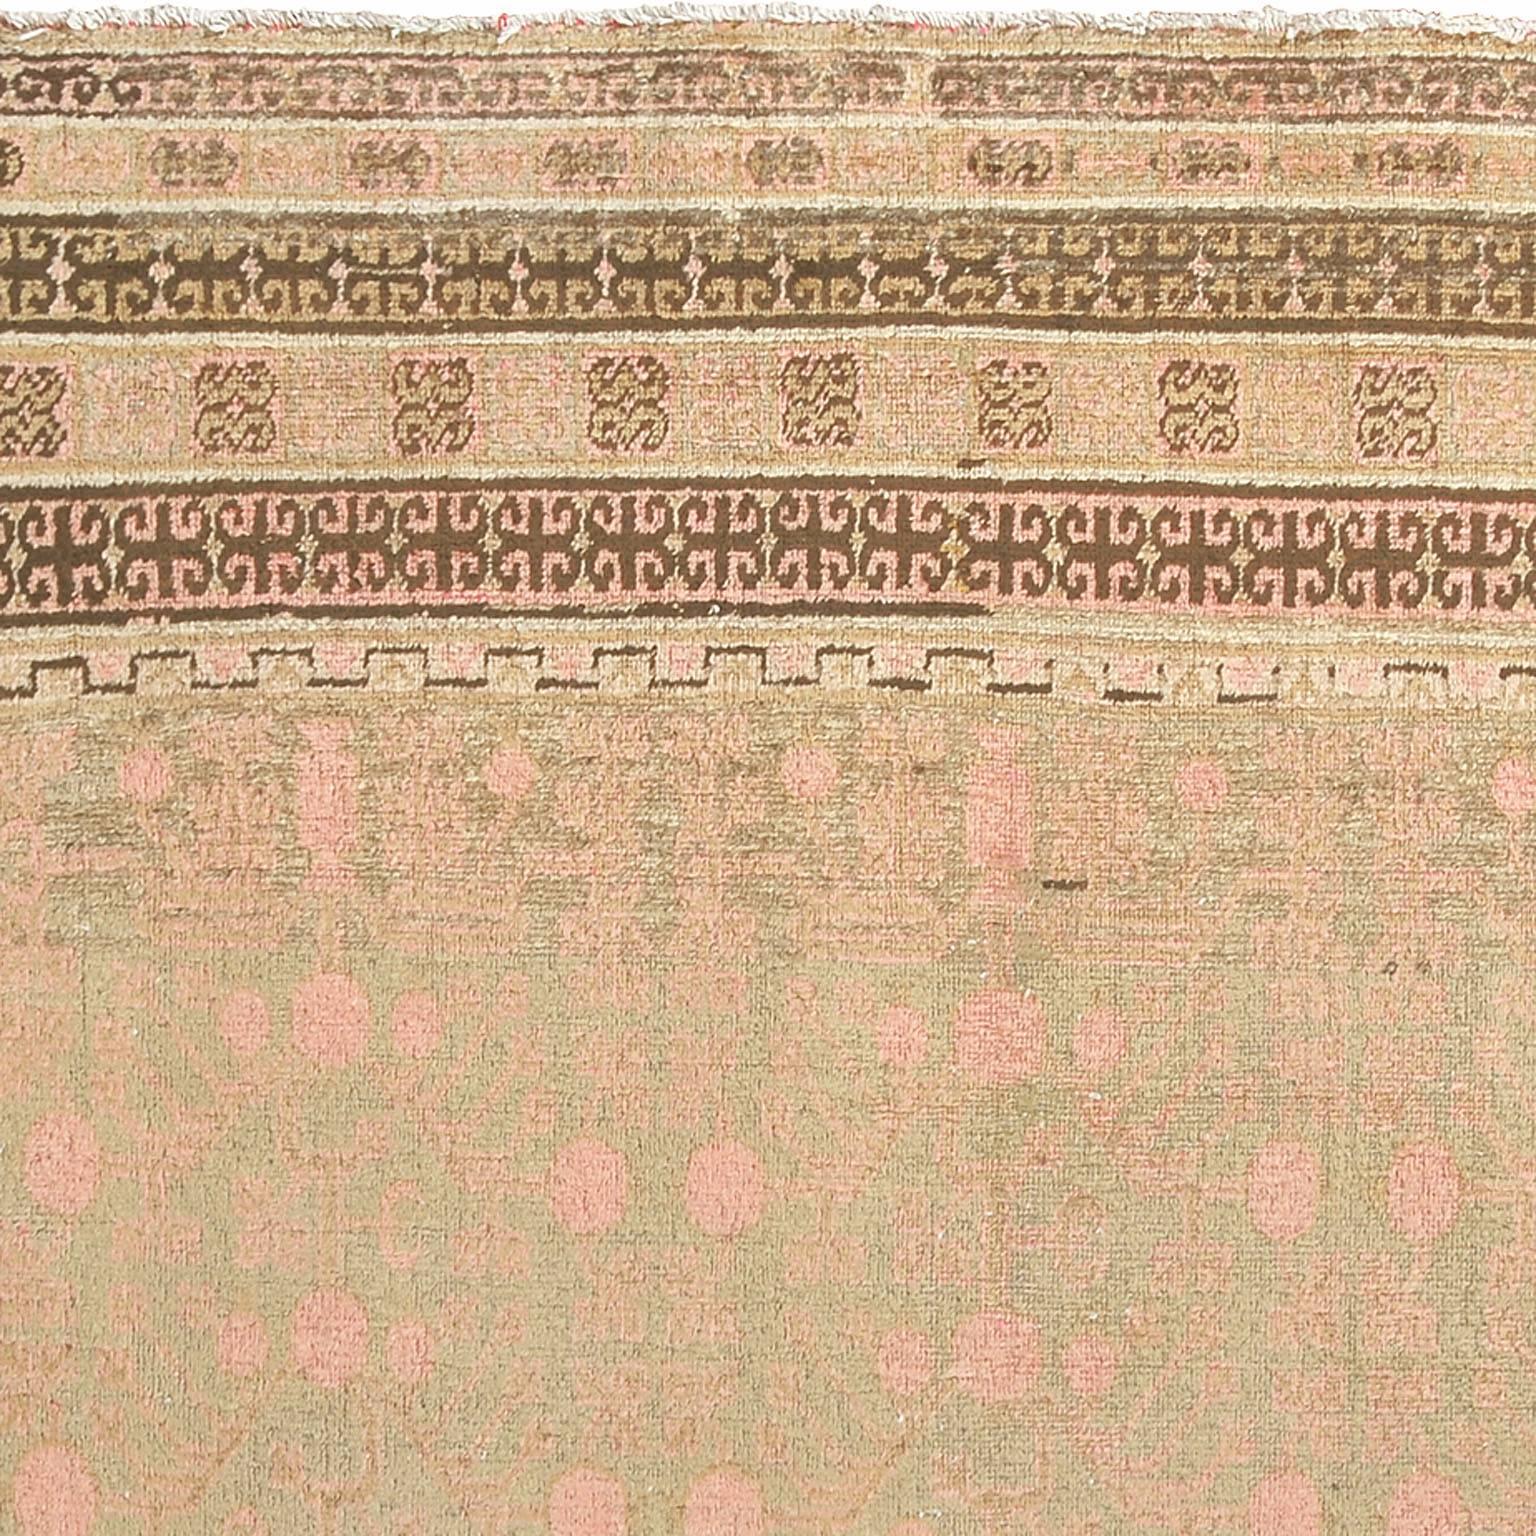 Early 20th Century Khotan Carpet In Fair Condition For Sale In New York, NY